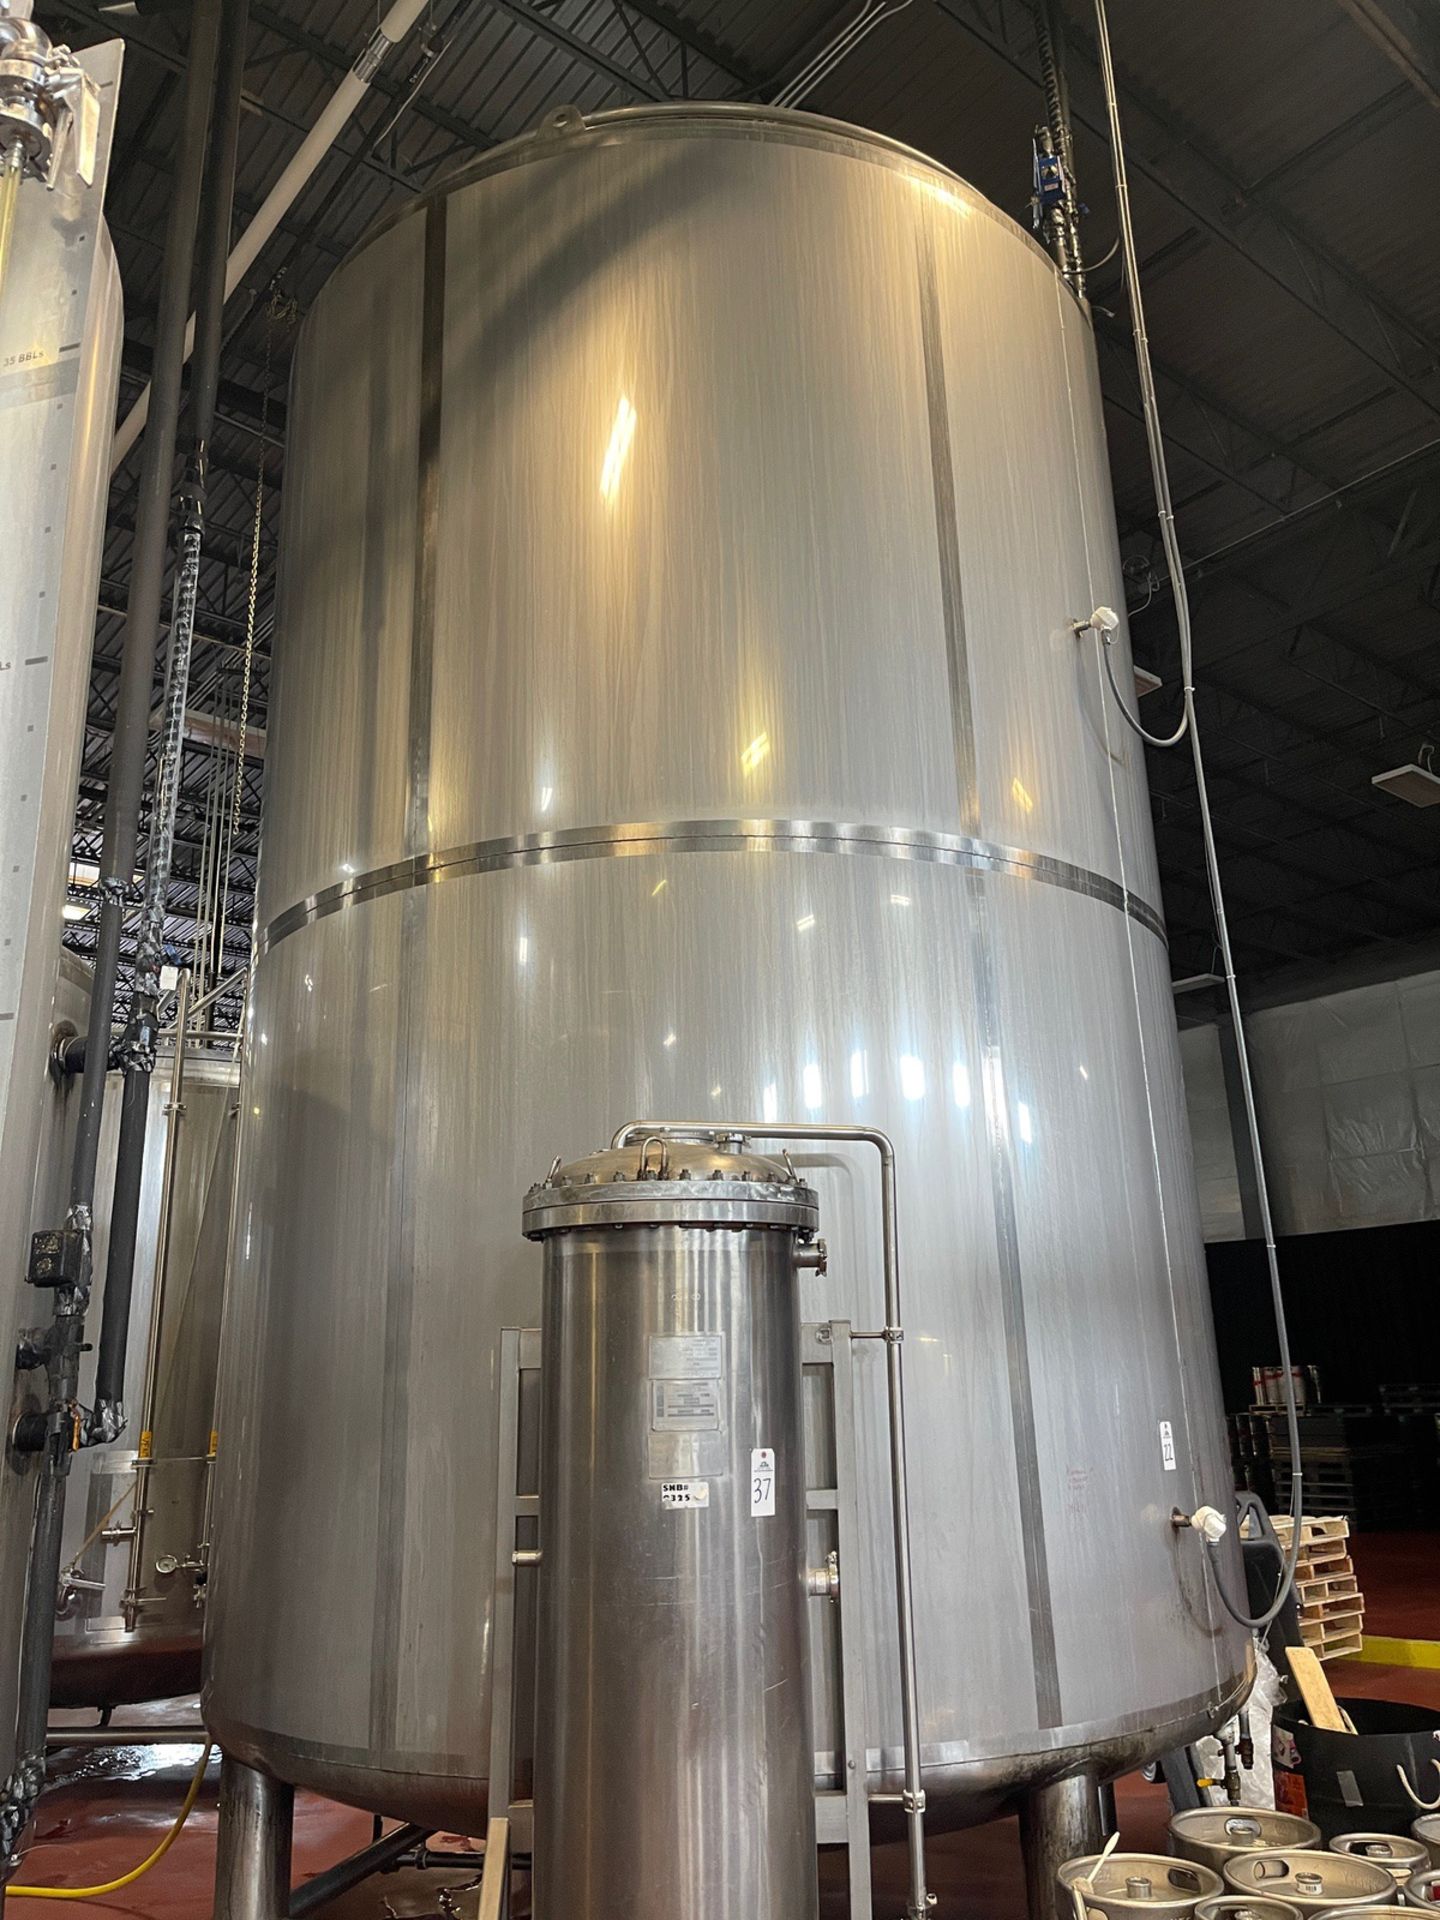 Quality Tank 400 BBL Stainless Steel Holding Tank, Glycol Jacketed, Rounded Bottom, | Rig Fee $6000 - Image 12 of 13